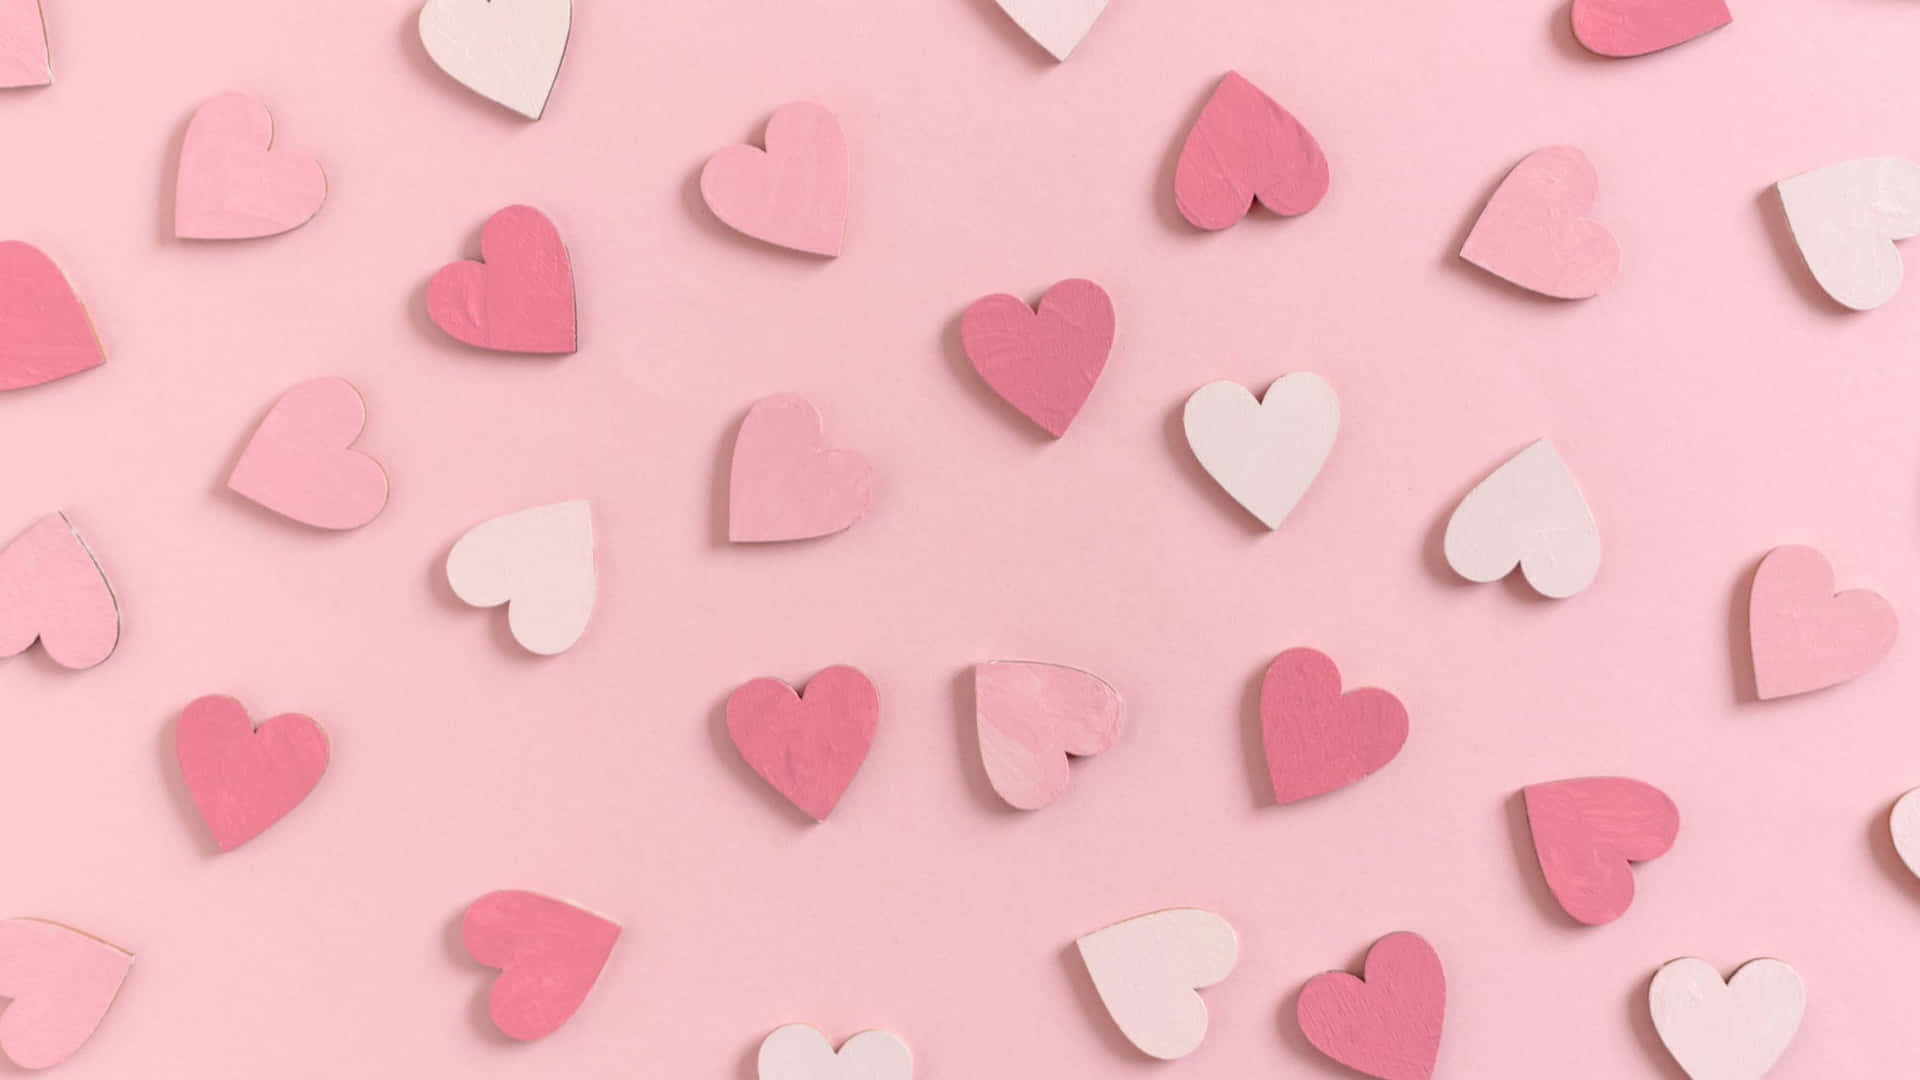 Aesthetic Computer Light Pink Patterned Hearts Wallpaper